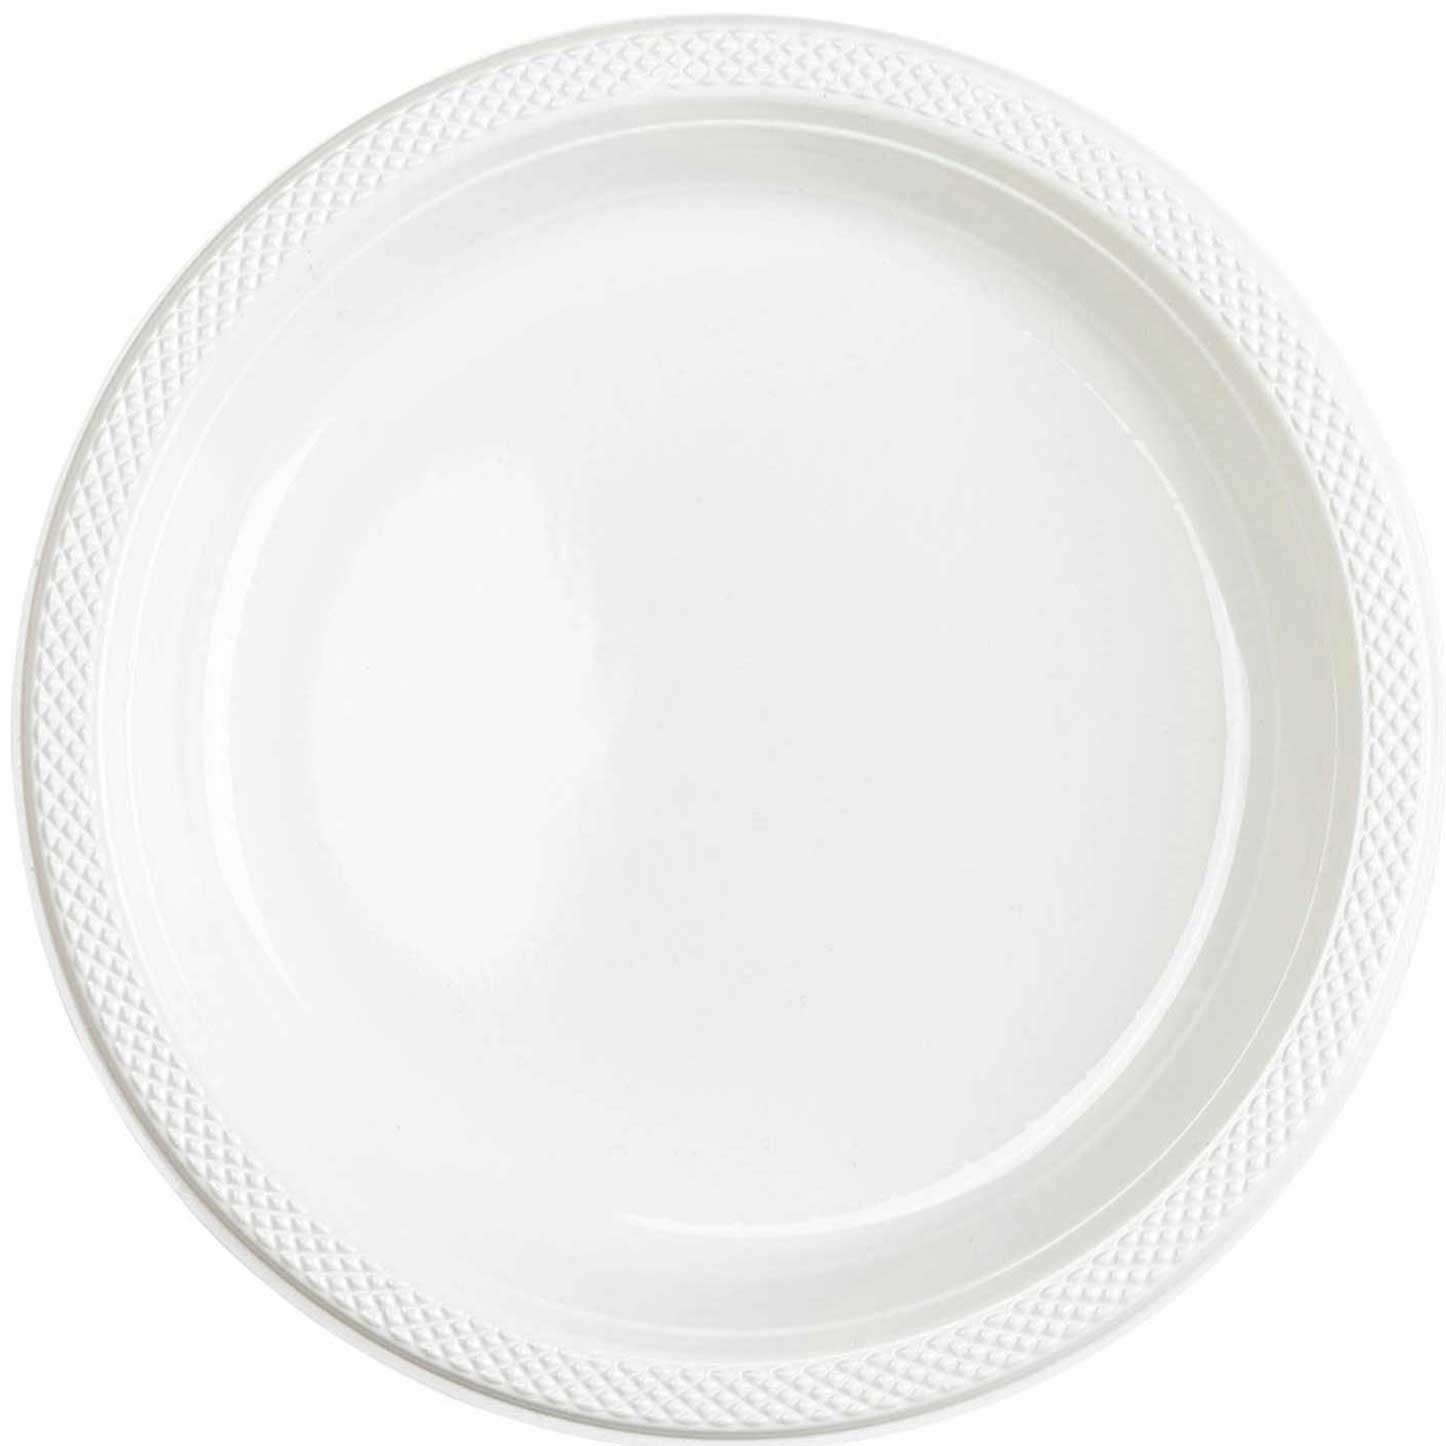 White Plastic Plates 10.25in, 20pcs Solid Tableware - Party Centre